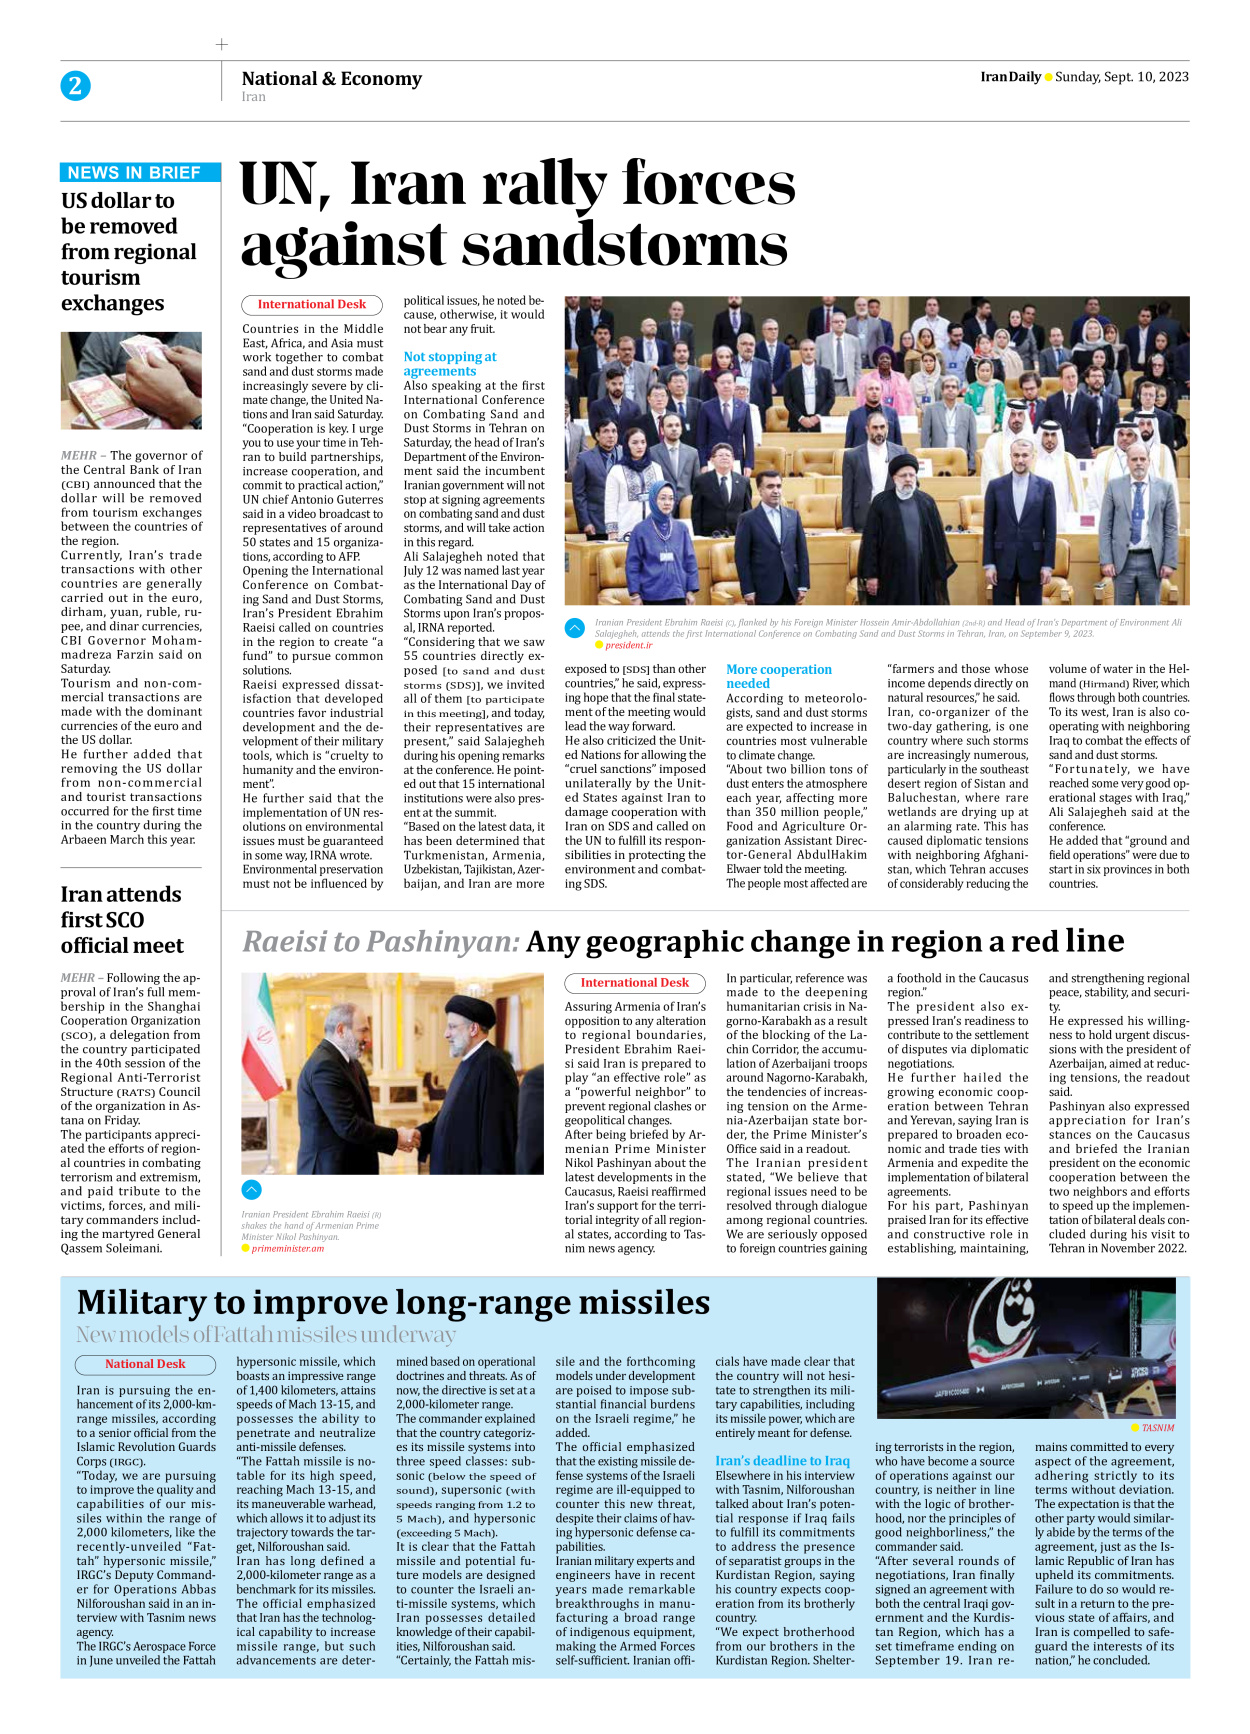 Iran Daily - Number Seven Thousand Three Hundred and Eighty Three - 10 September 2023 - Page 2